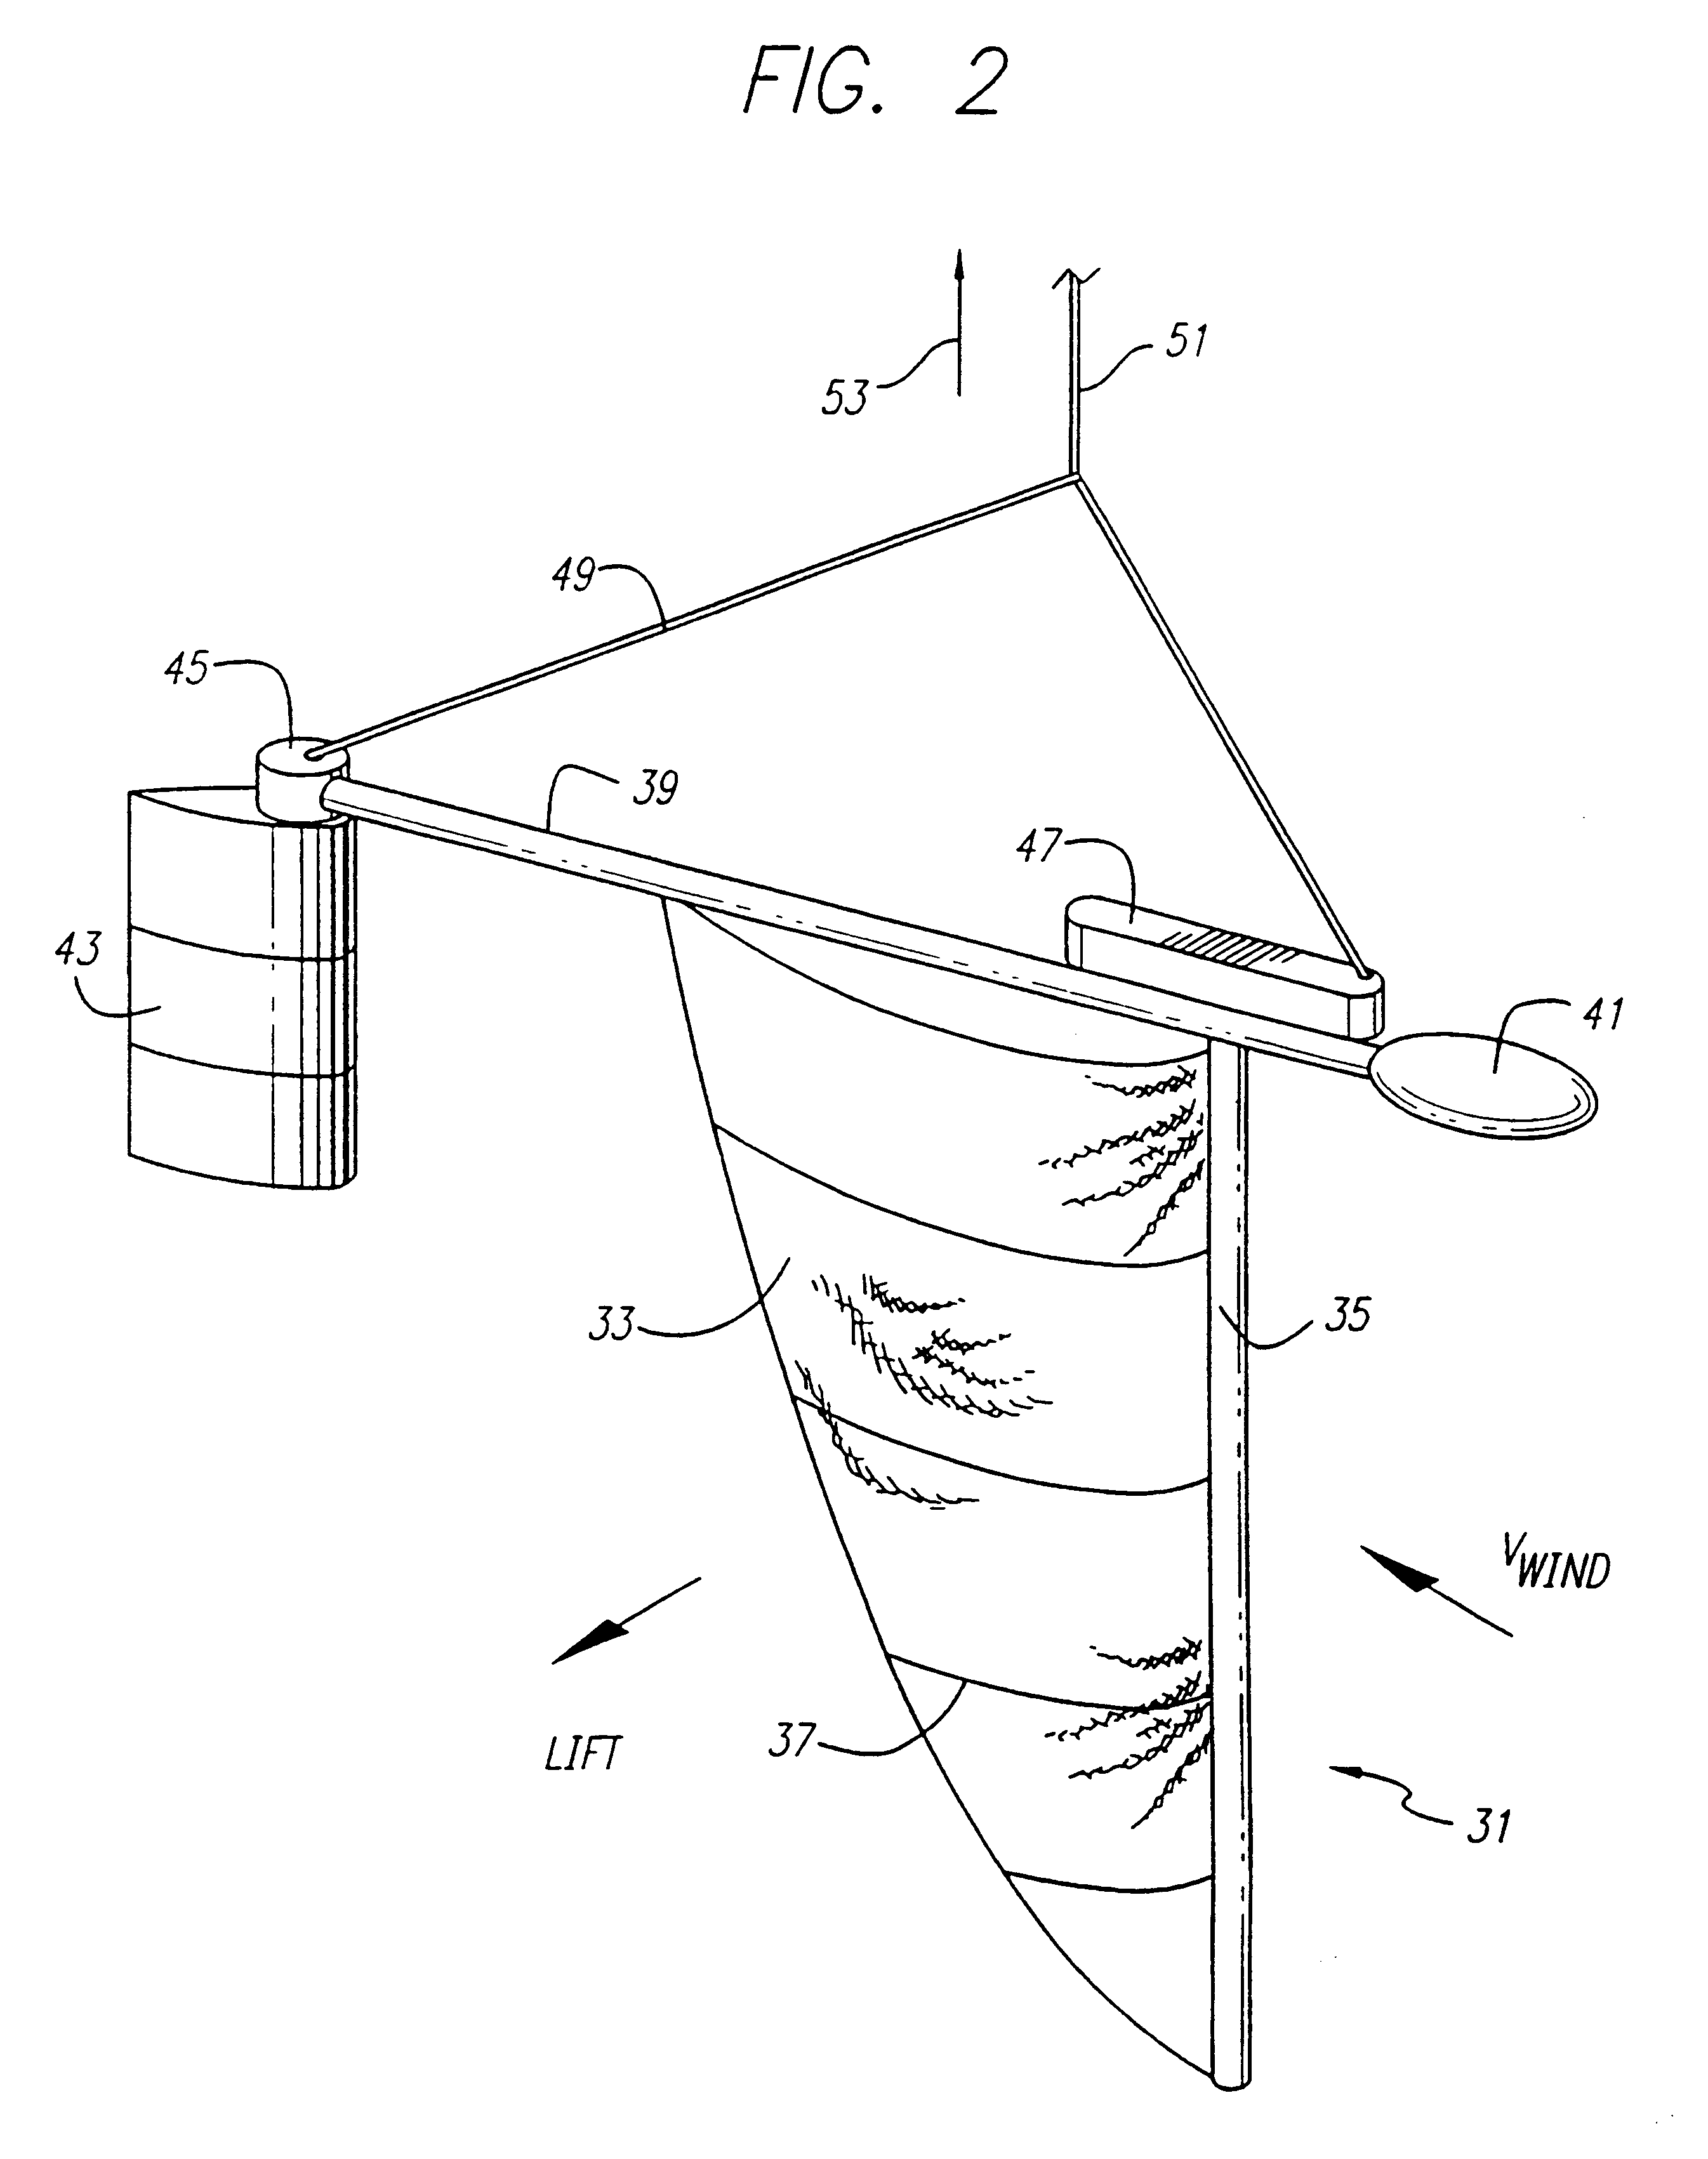 Balloon trajectory control system